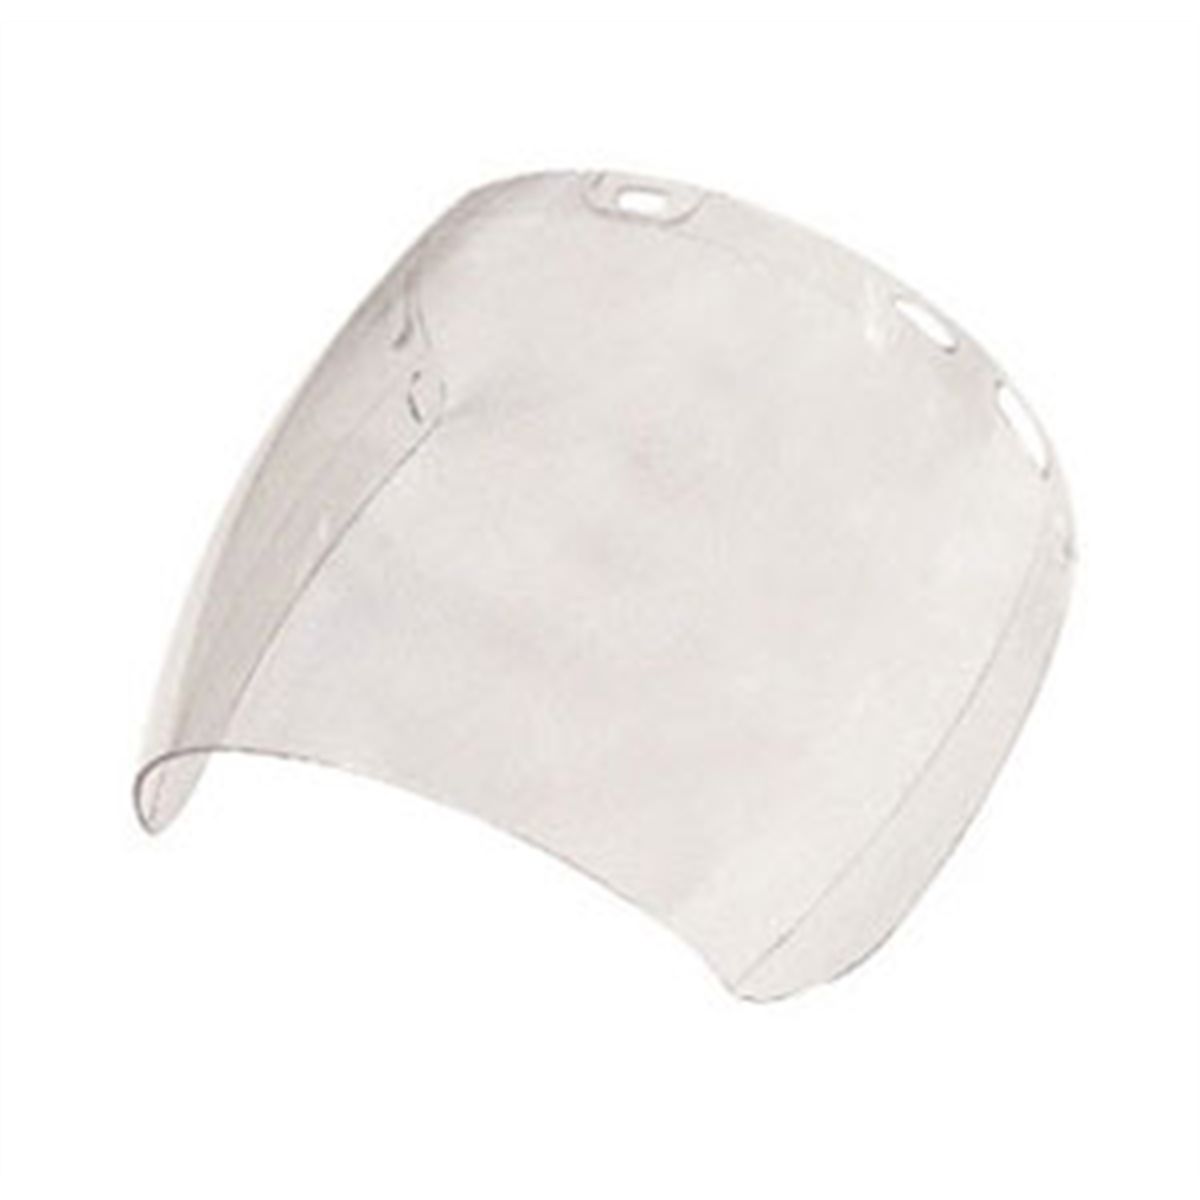 Replacement Shield for 5145 - Clear